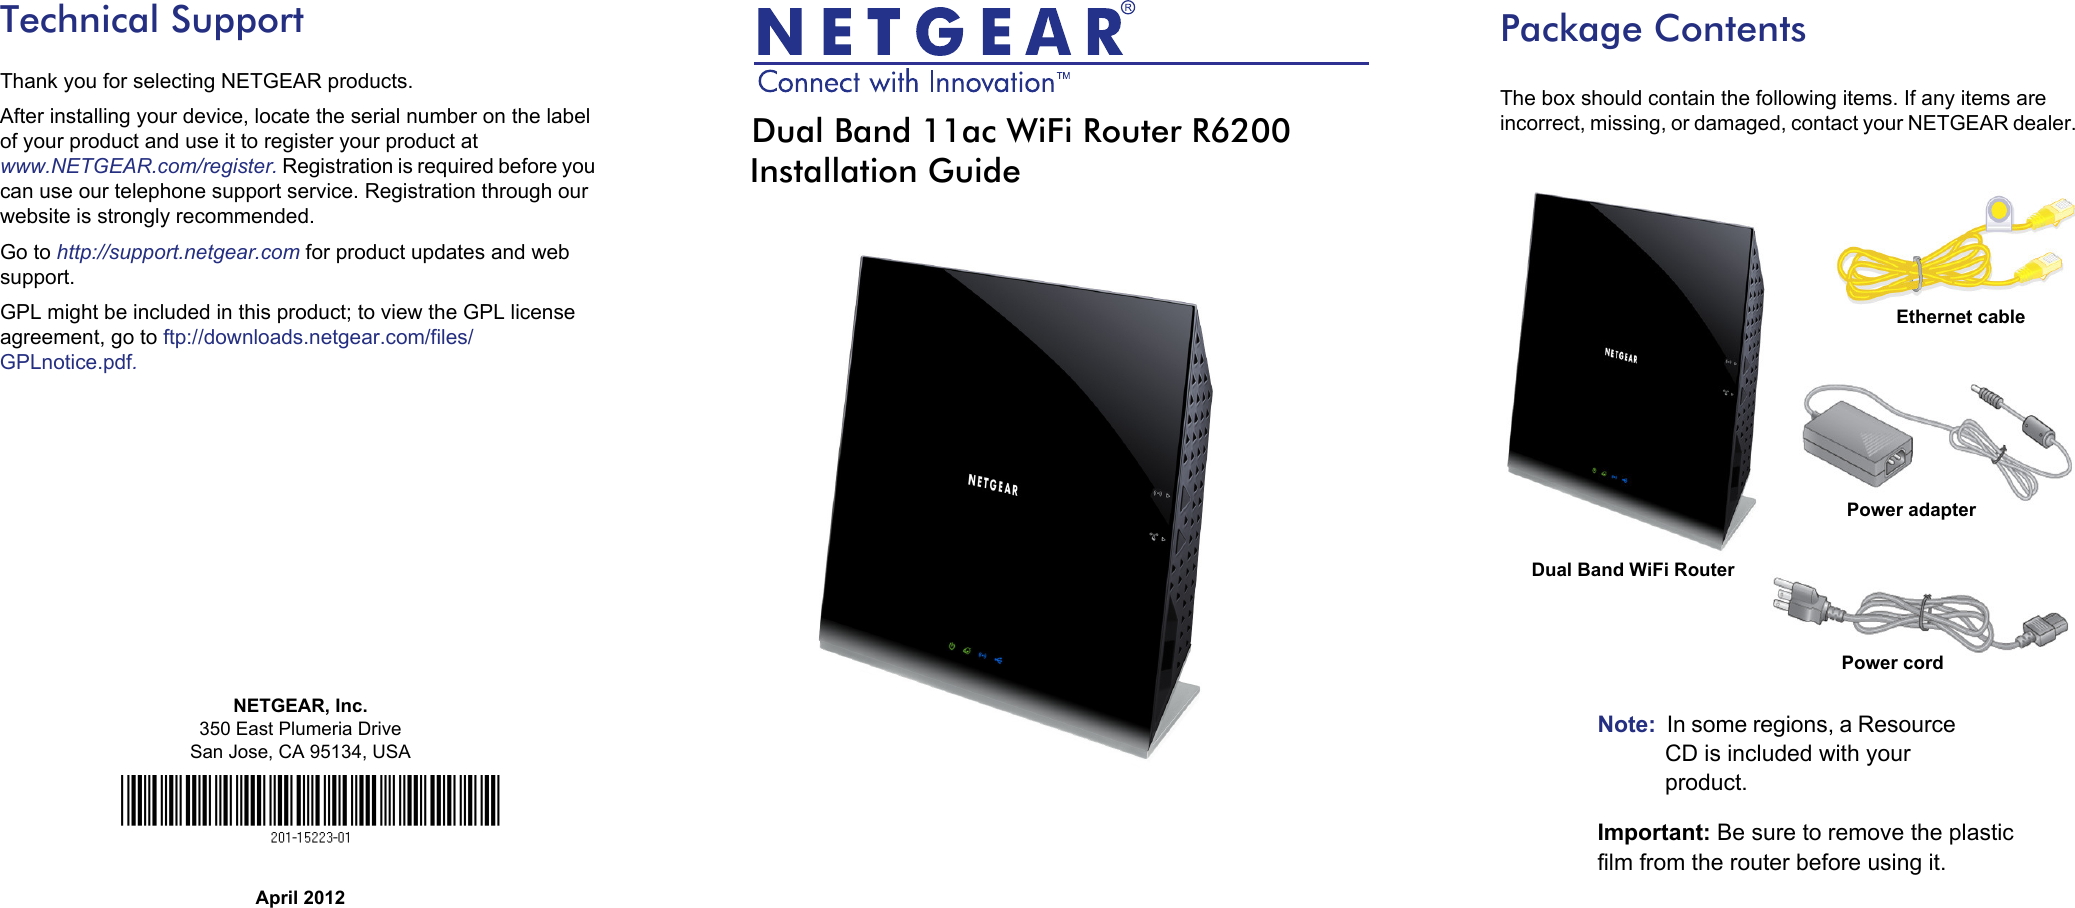 NETGEAR, Inc.350 East Plumeria DriveSan Jose, CA 95134, USAApril 2012Technical SupportThank you for selecting NETGEAR products.After installing your device, locate the serial number on the label of your product and use it to register your product at www.NETGEAR.com/register. Registration is required before you can use our telephone support service. Registration through our website is strongly recommended.Go to http://support.netgear.com for product updates and web support.GPL might be included in this product; to view the GPL license agreement, go to ftp://downloads.netgear.com/files/GPLnotice.pdf.Dual Band 11ac WiFi Router R6200Installation GuidePackage ContentsThe box should contain the following items. If any items are incorrect, missing, or damaged, contact your NETGEAR dealer. Note:  In some regions, a Resource CD is included with your product.Important: Be sure to remove the plastic film from the router before using it.Ethernet cablePower cordDual Band WiFi Router Power adapter